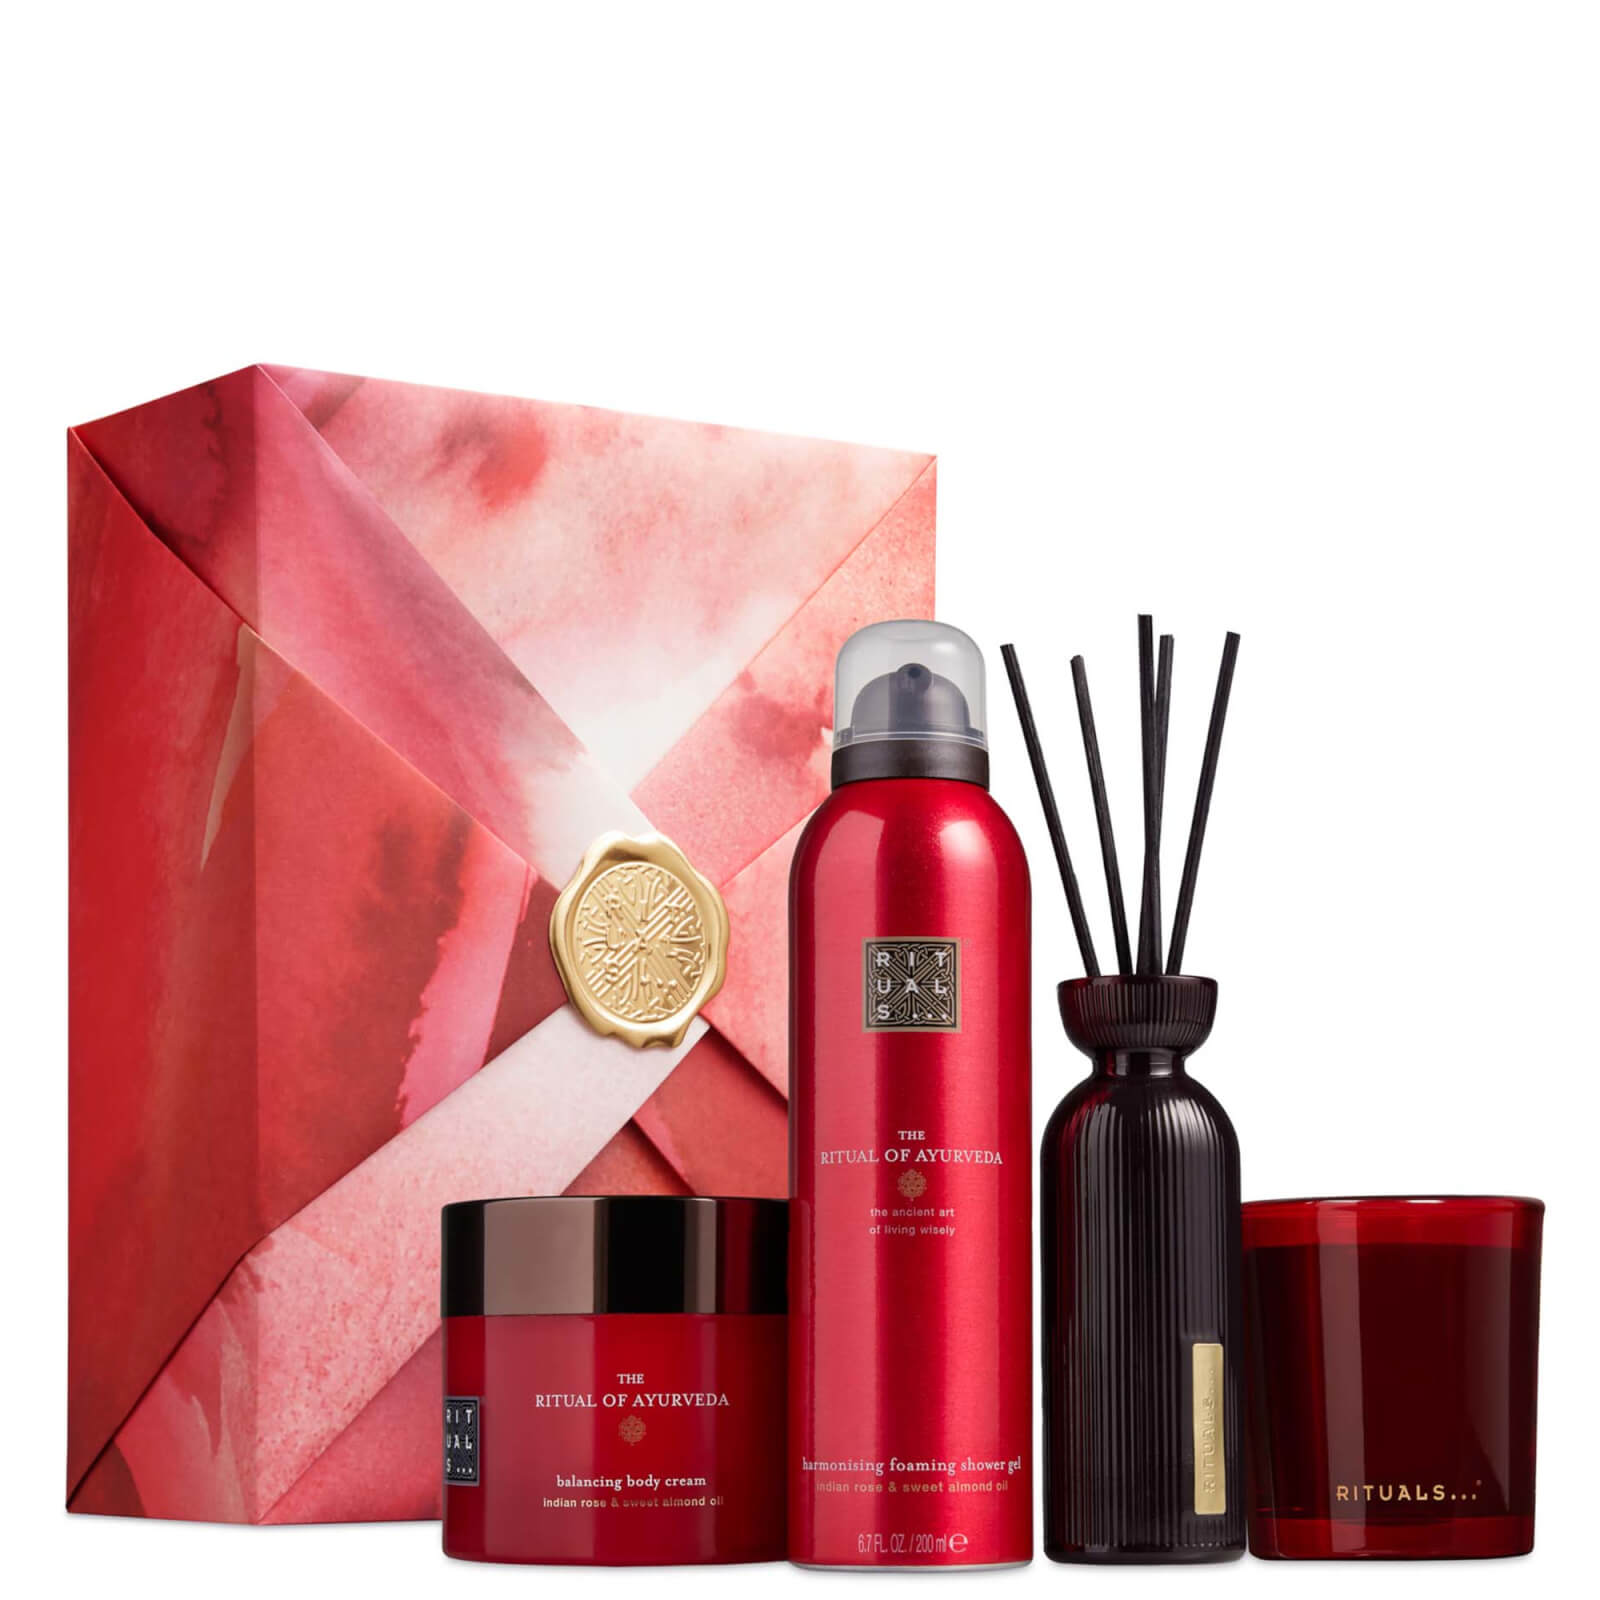 Rituals The Ritual of Ayurveda Sweet Almond & Indian Rose Bath and Body Gift Set Large